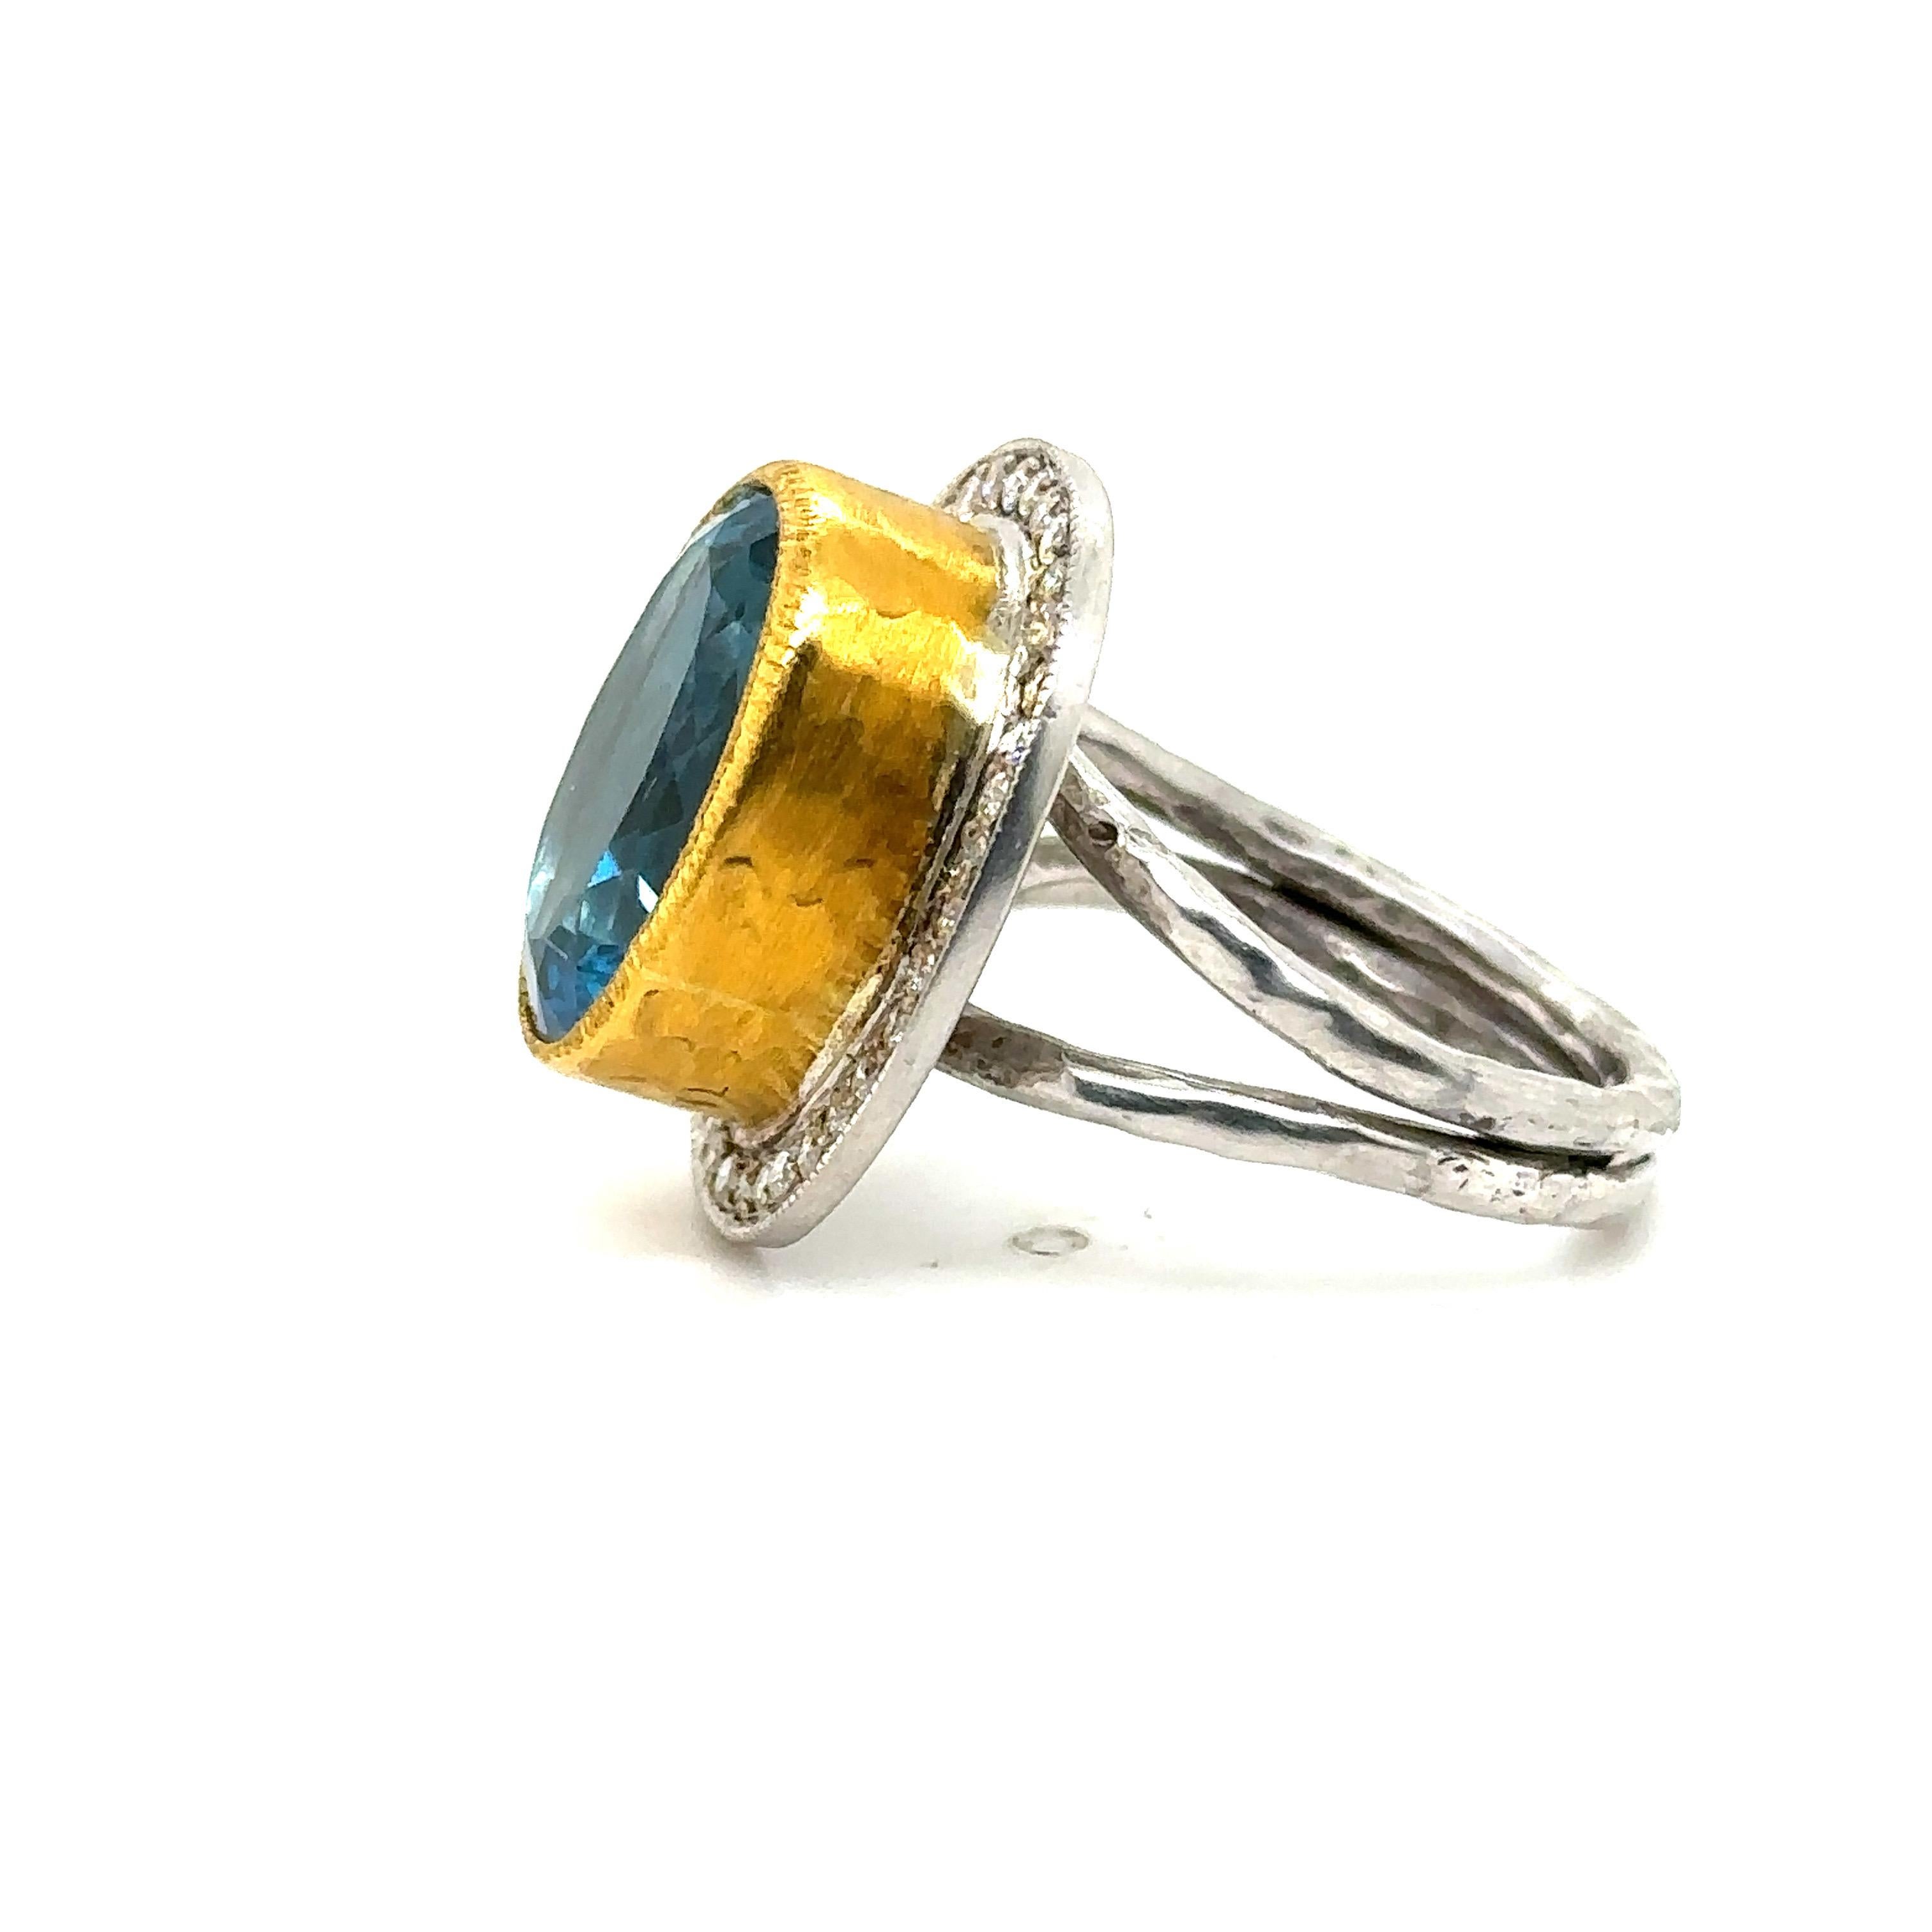 24K GOLD/STERLING SILVER RING with DIAMONDS AND SWISS BLUE TOPAZ 
Metal: 24K GOLD/SS
Diamond Info: I/J COLOR SI1/2 ROUND BRILLIANT 0.52CT
Stone Info: 16X12MM SWISS BLUE TOPAZ 14CT
Total Diamond Weight:  0.52 cwt.
Item Weight: 11.82 gm
Ring Size: 8